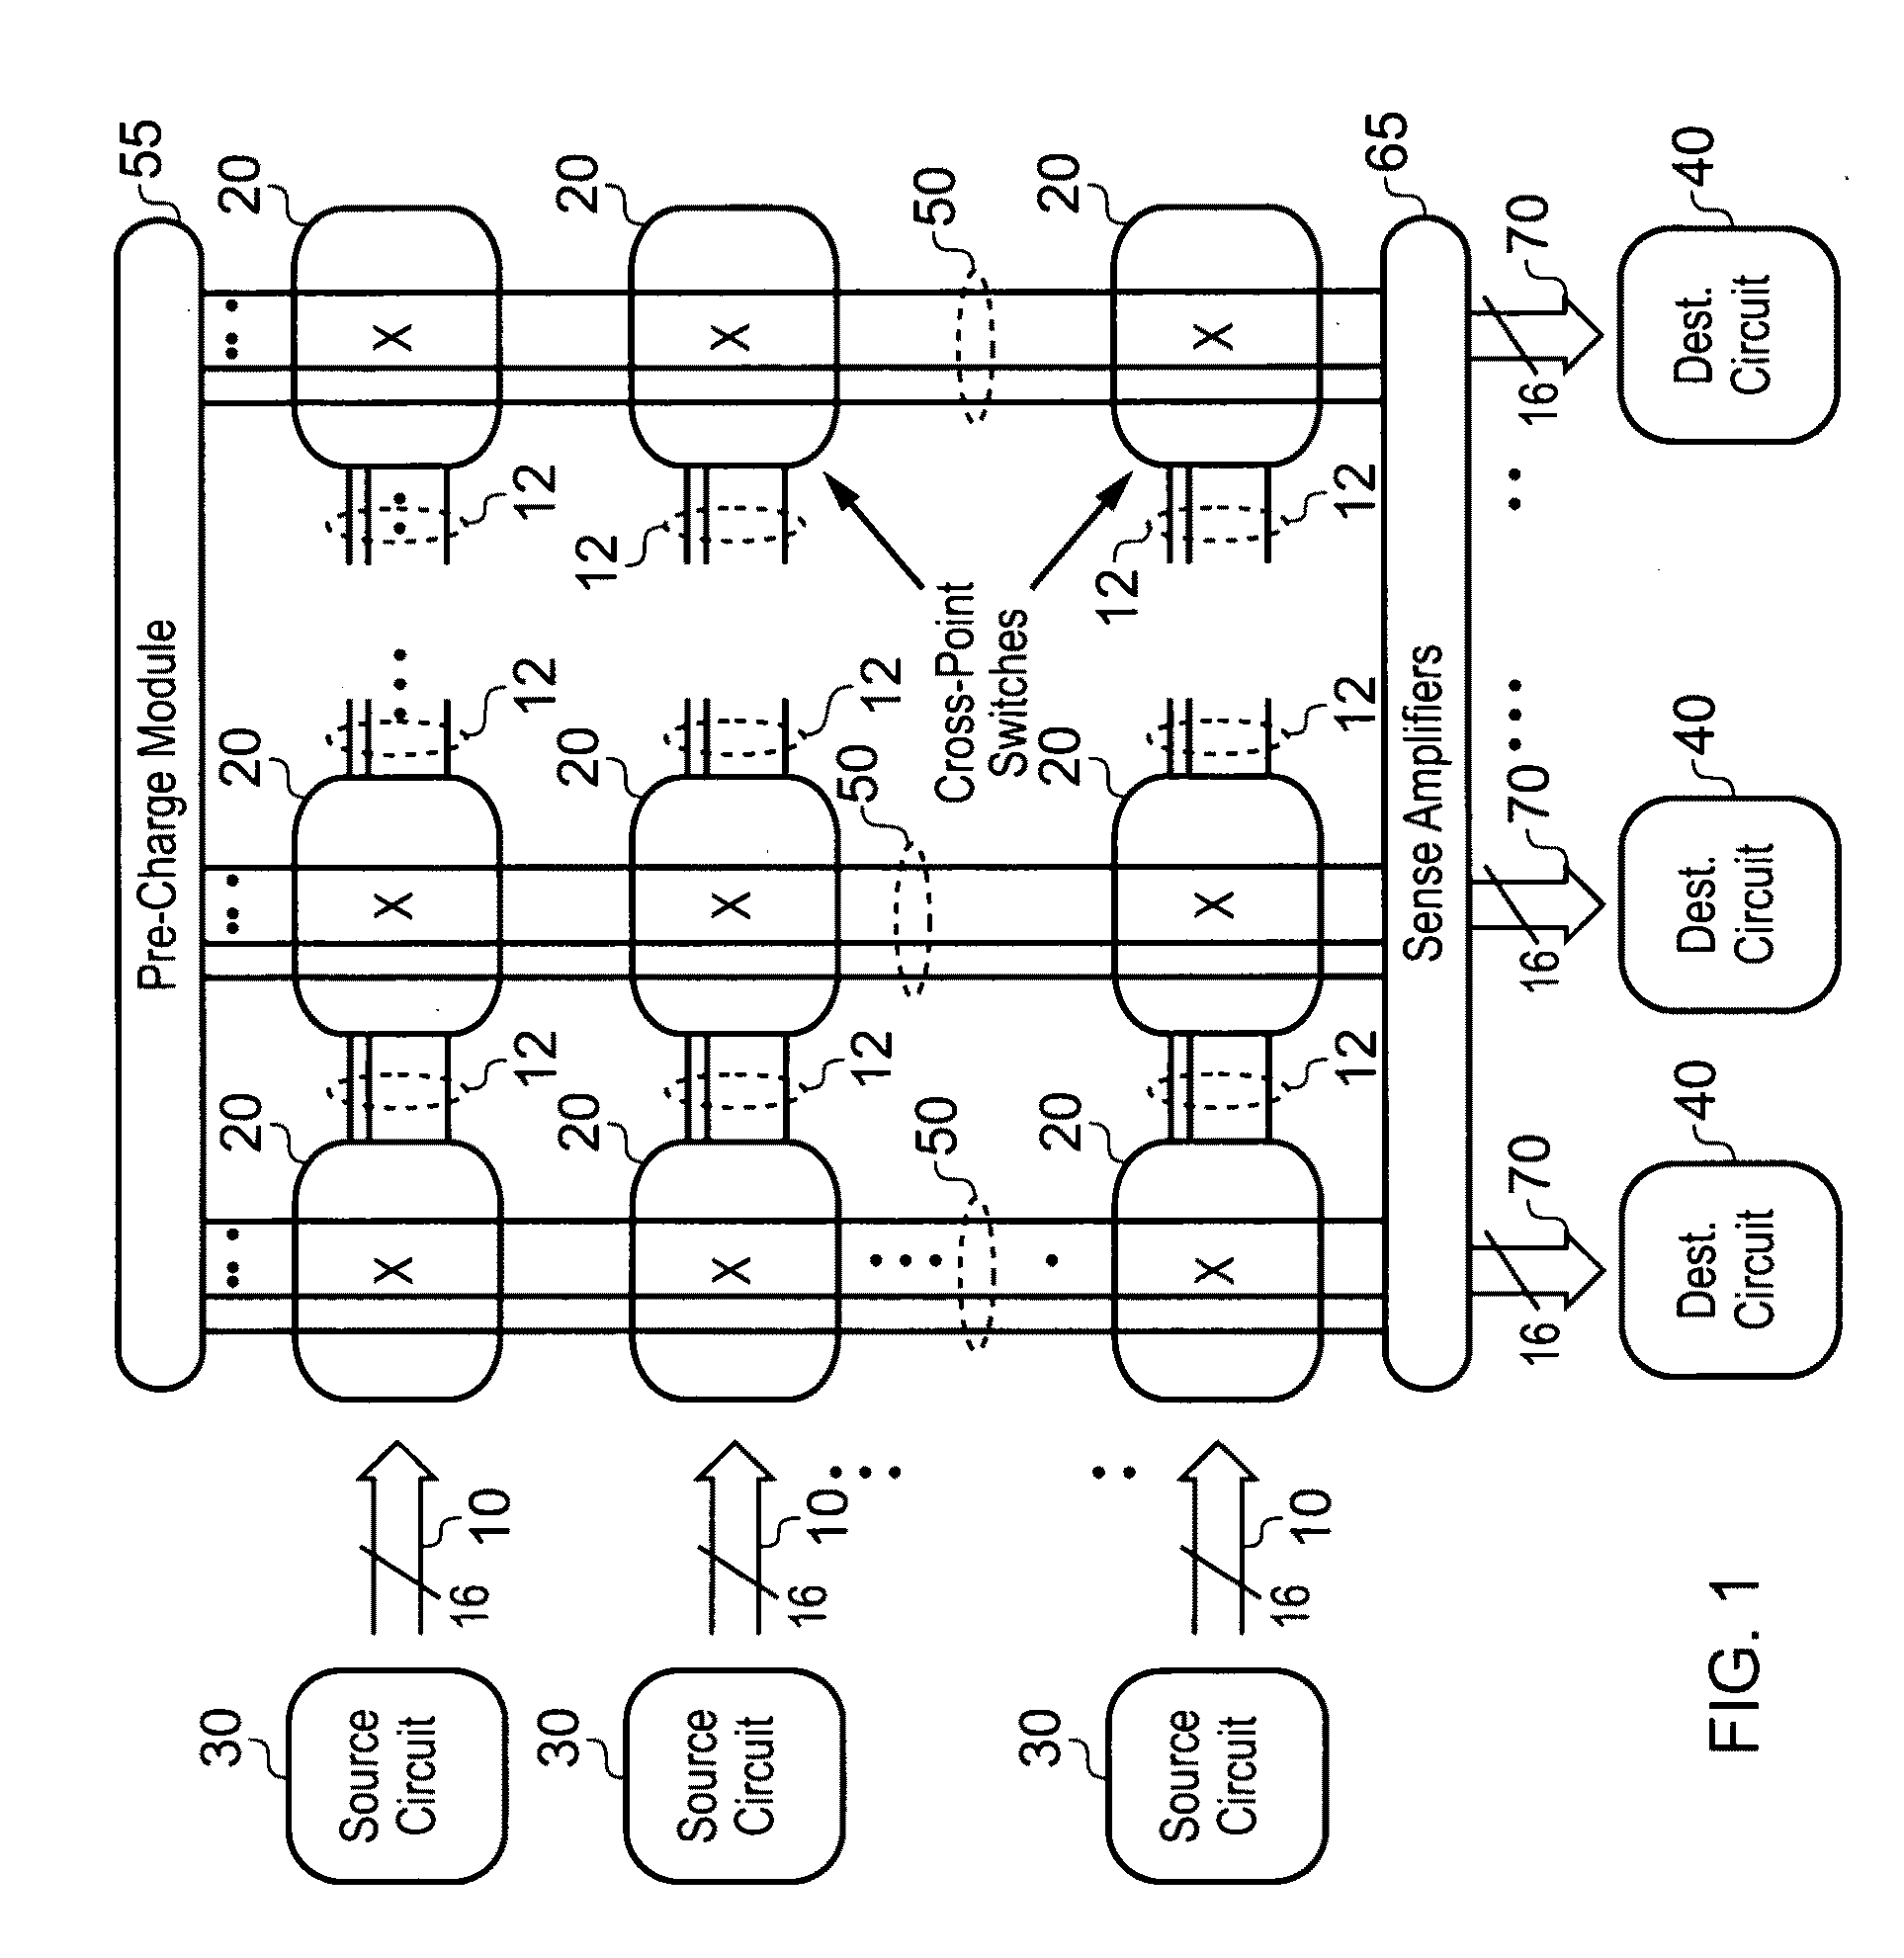 Crossbar circuitry for applying an adaptive priority scheme and method of operation of such crossbar circuitry